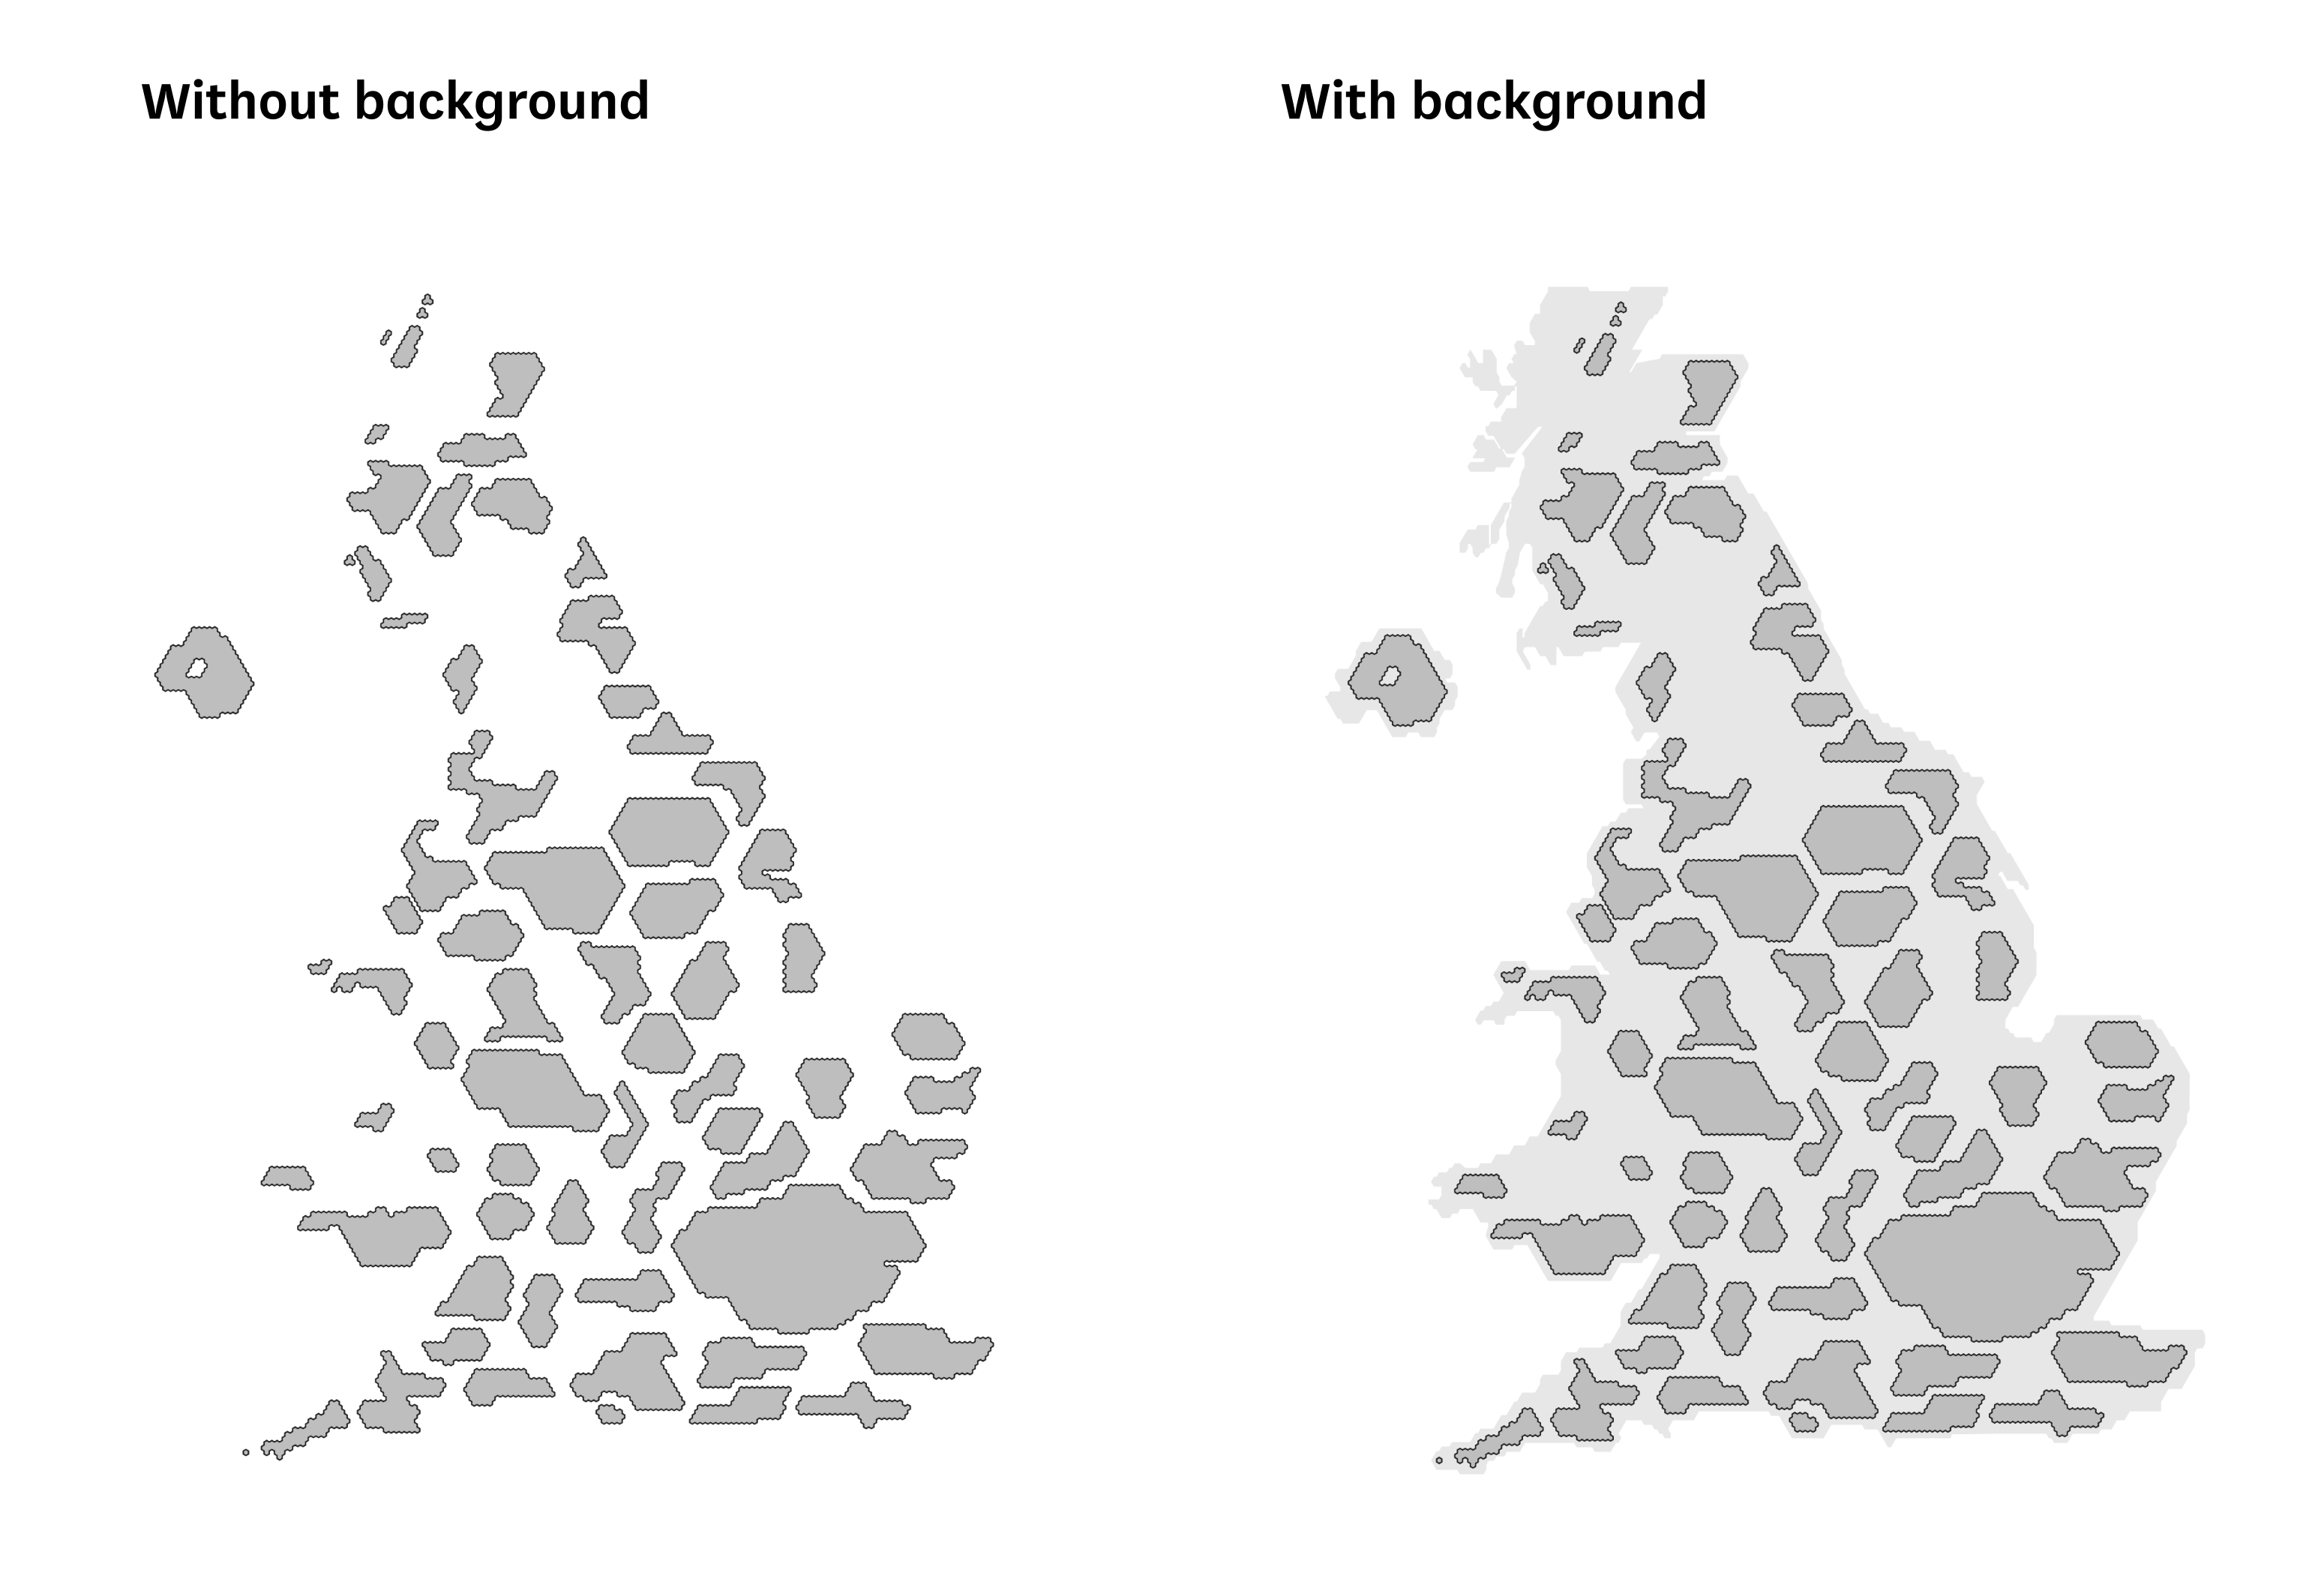 The basic non-contiguous UK cartogram template with and without the backgruond shape